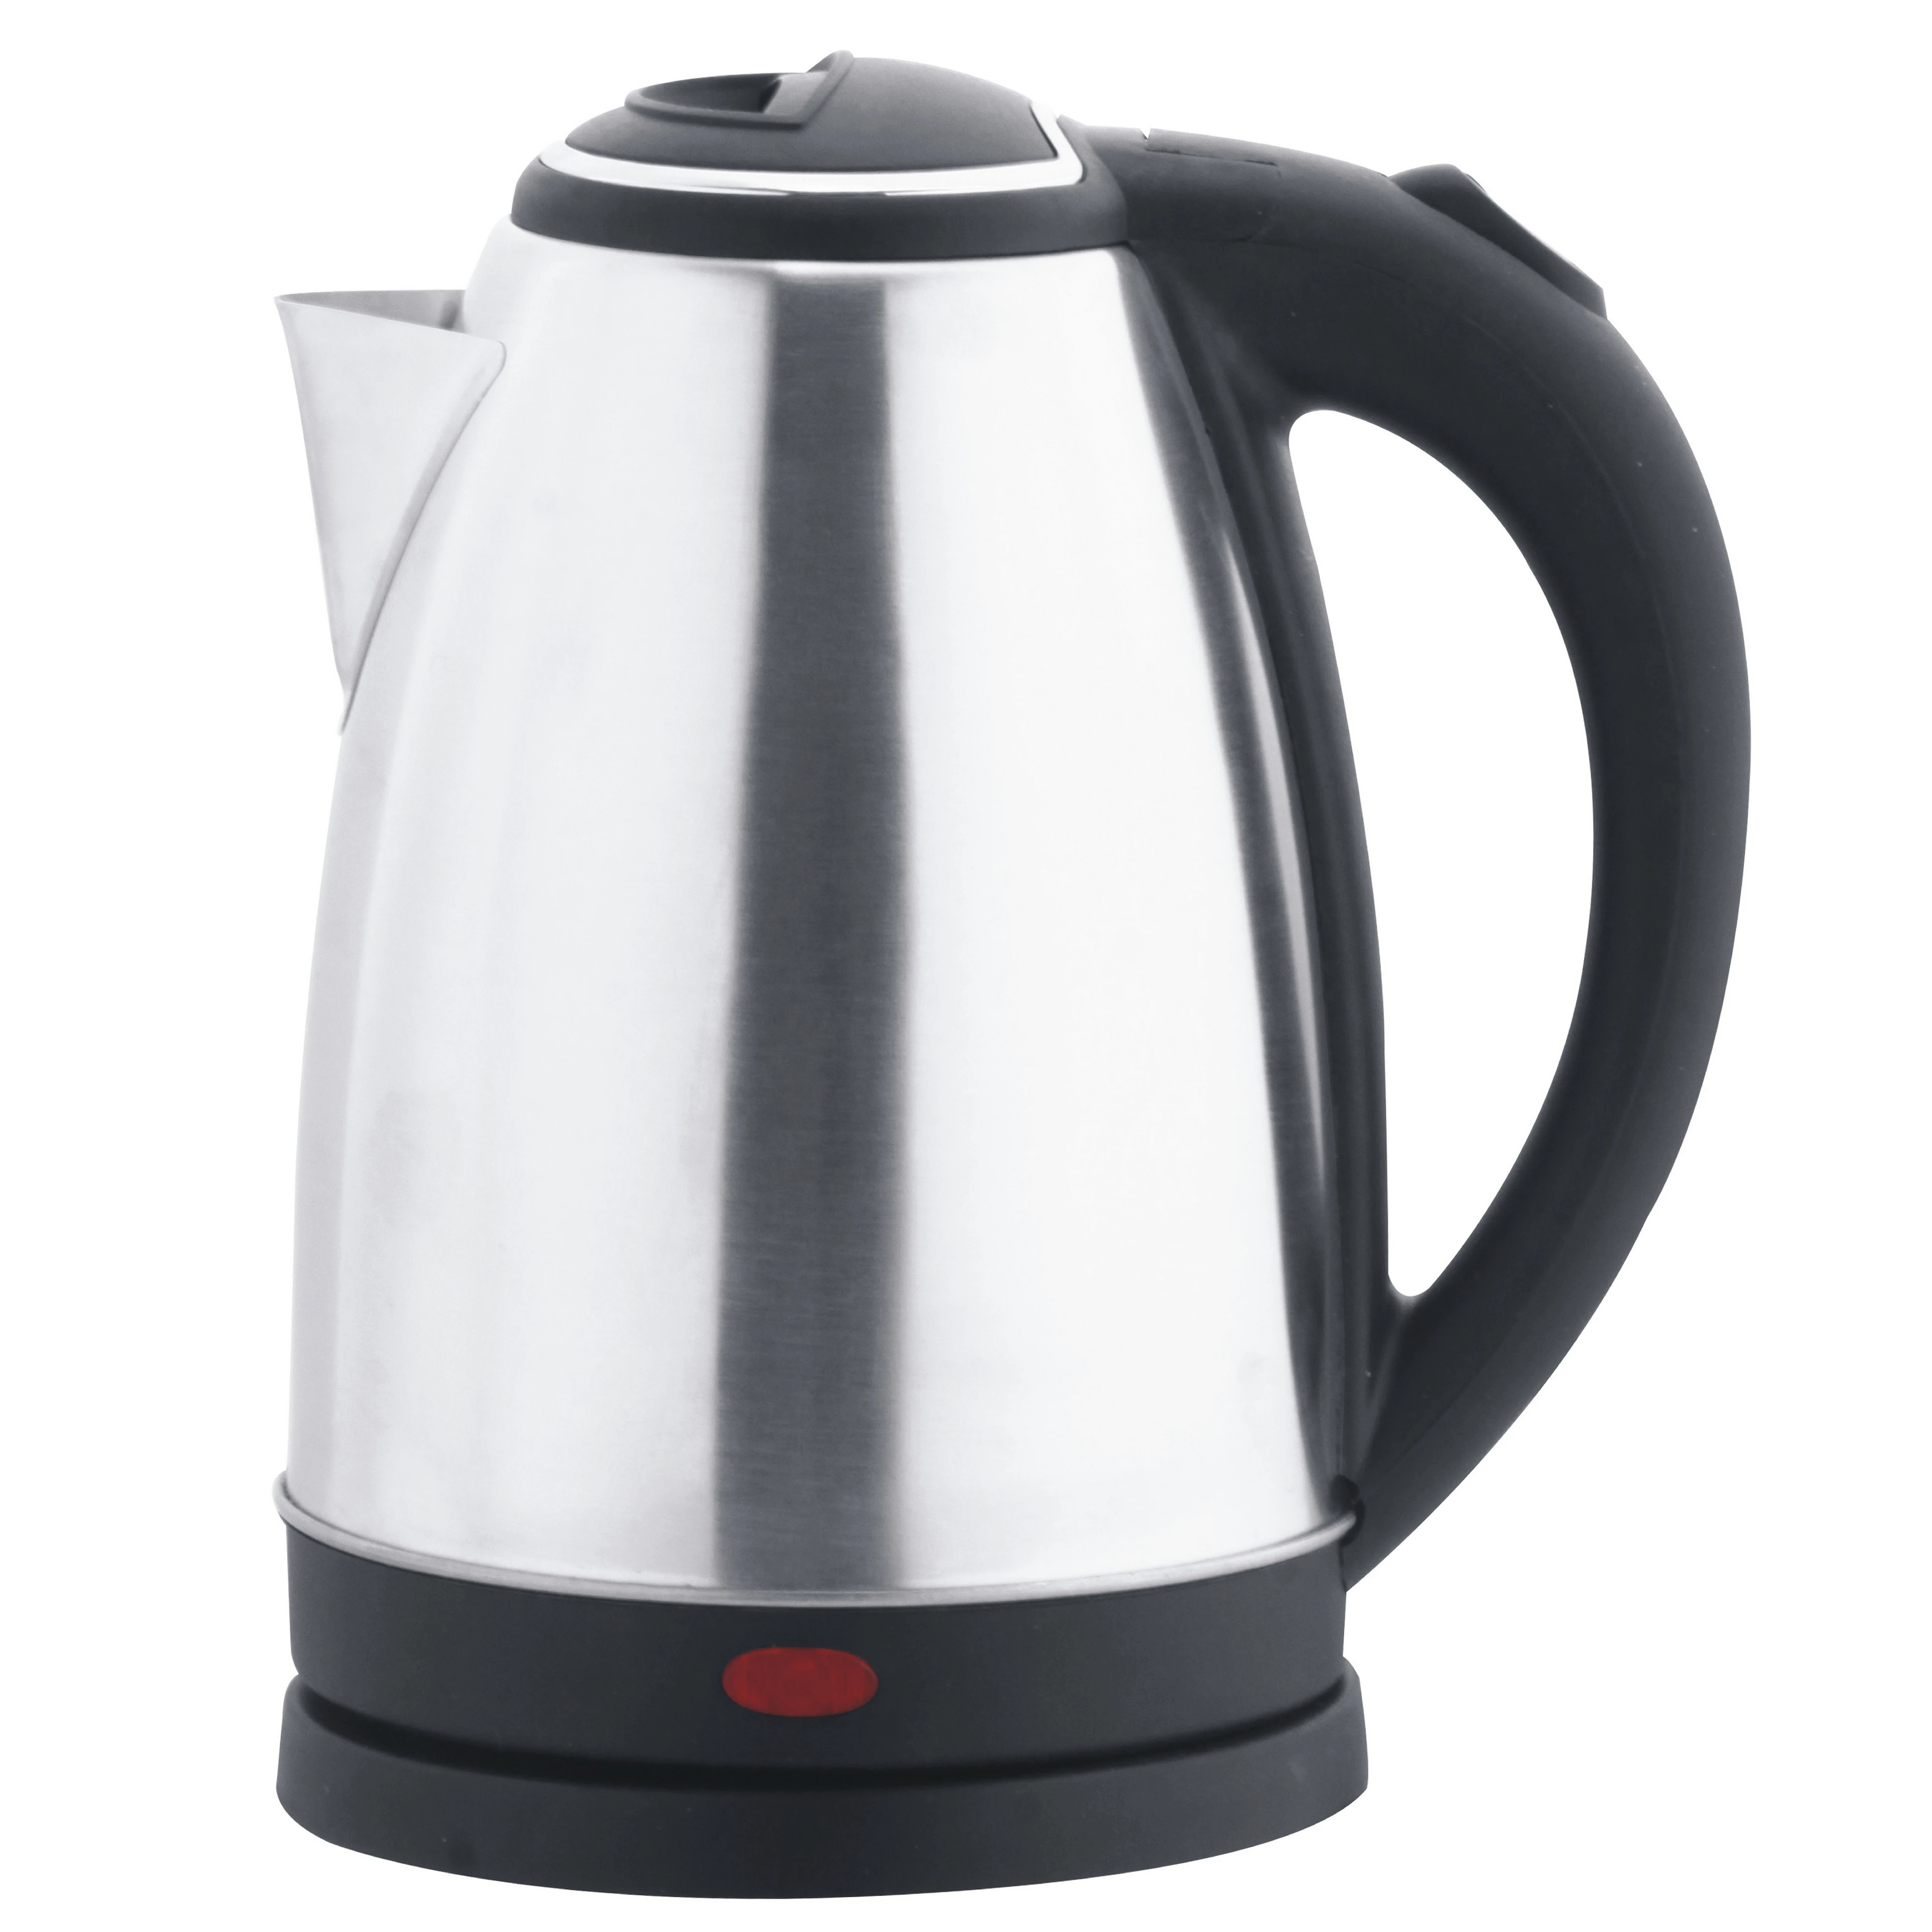 kettle low price